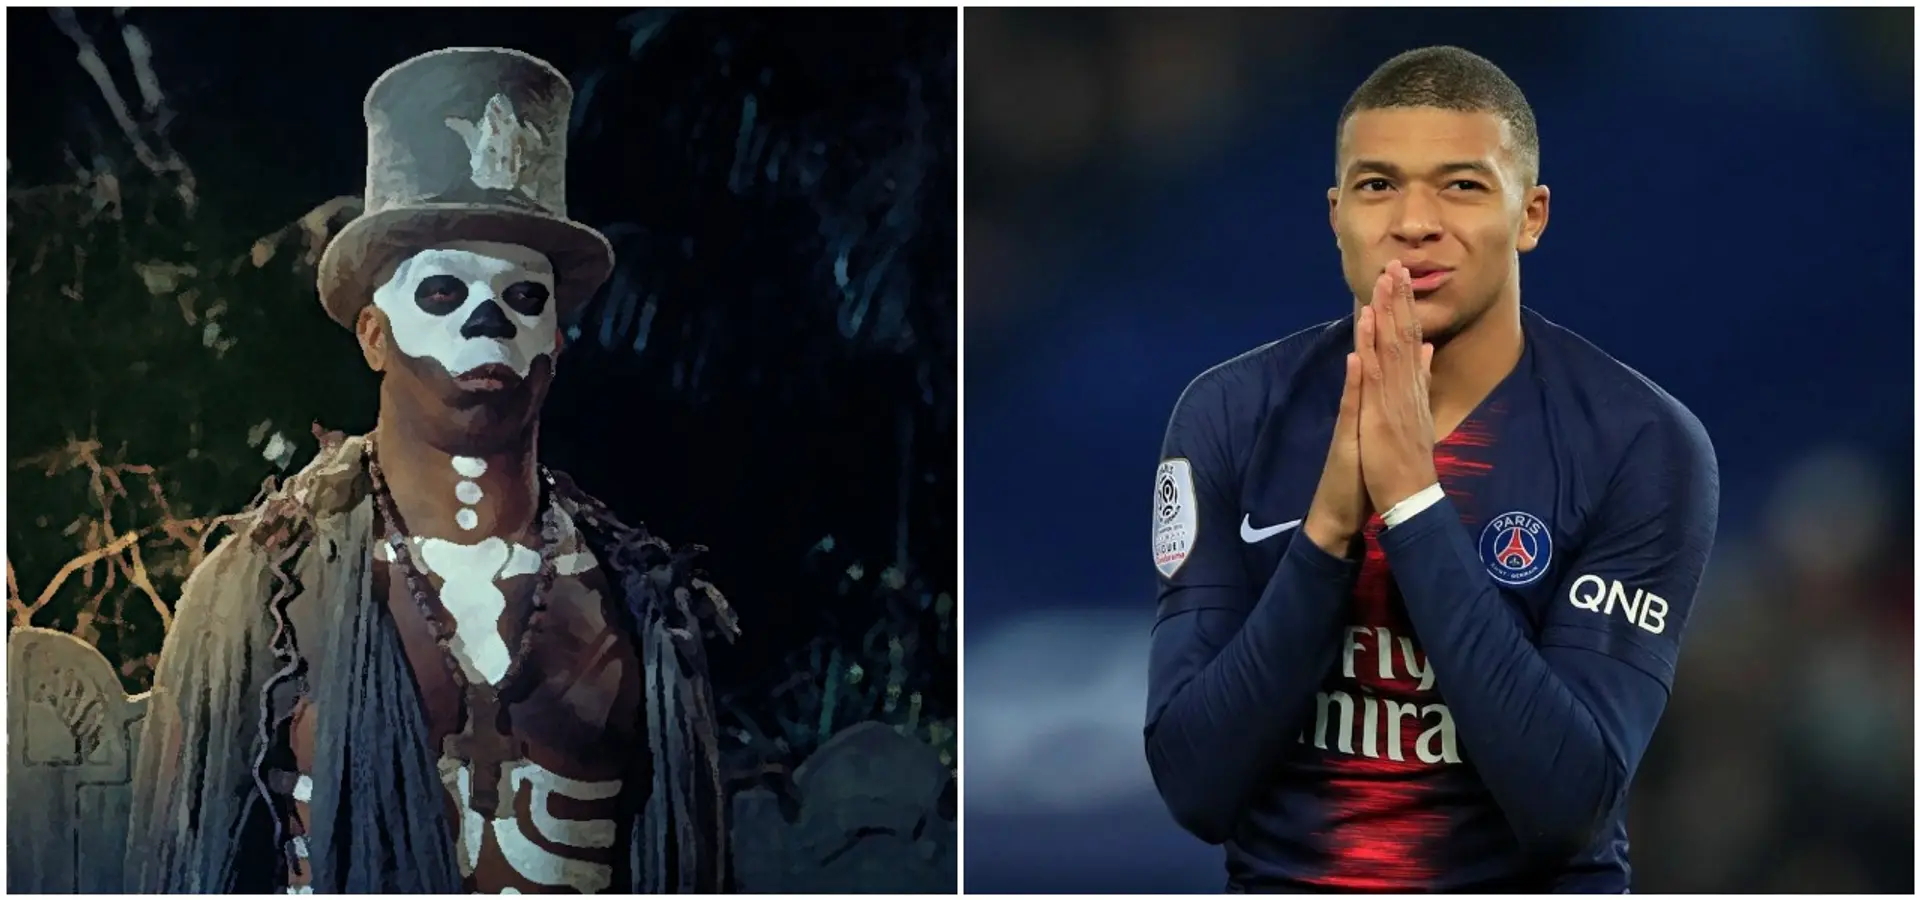 ‘It’ll be a 4-team battle for him’: Haiti’s voodoo priest predicts Mbappe’s future